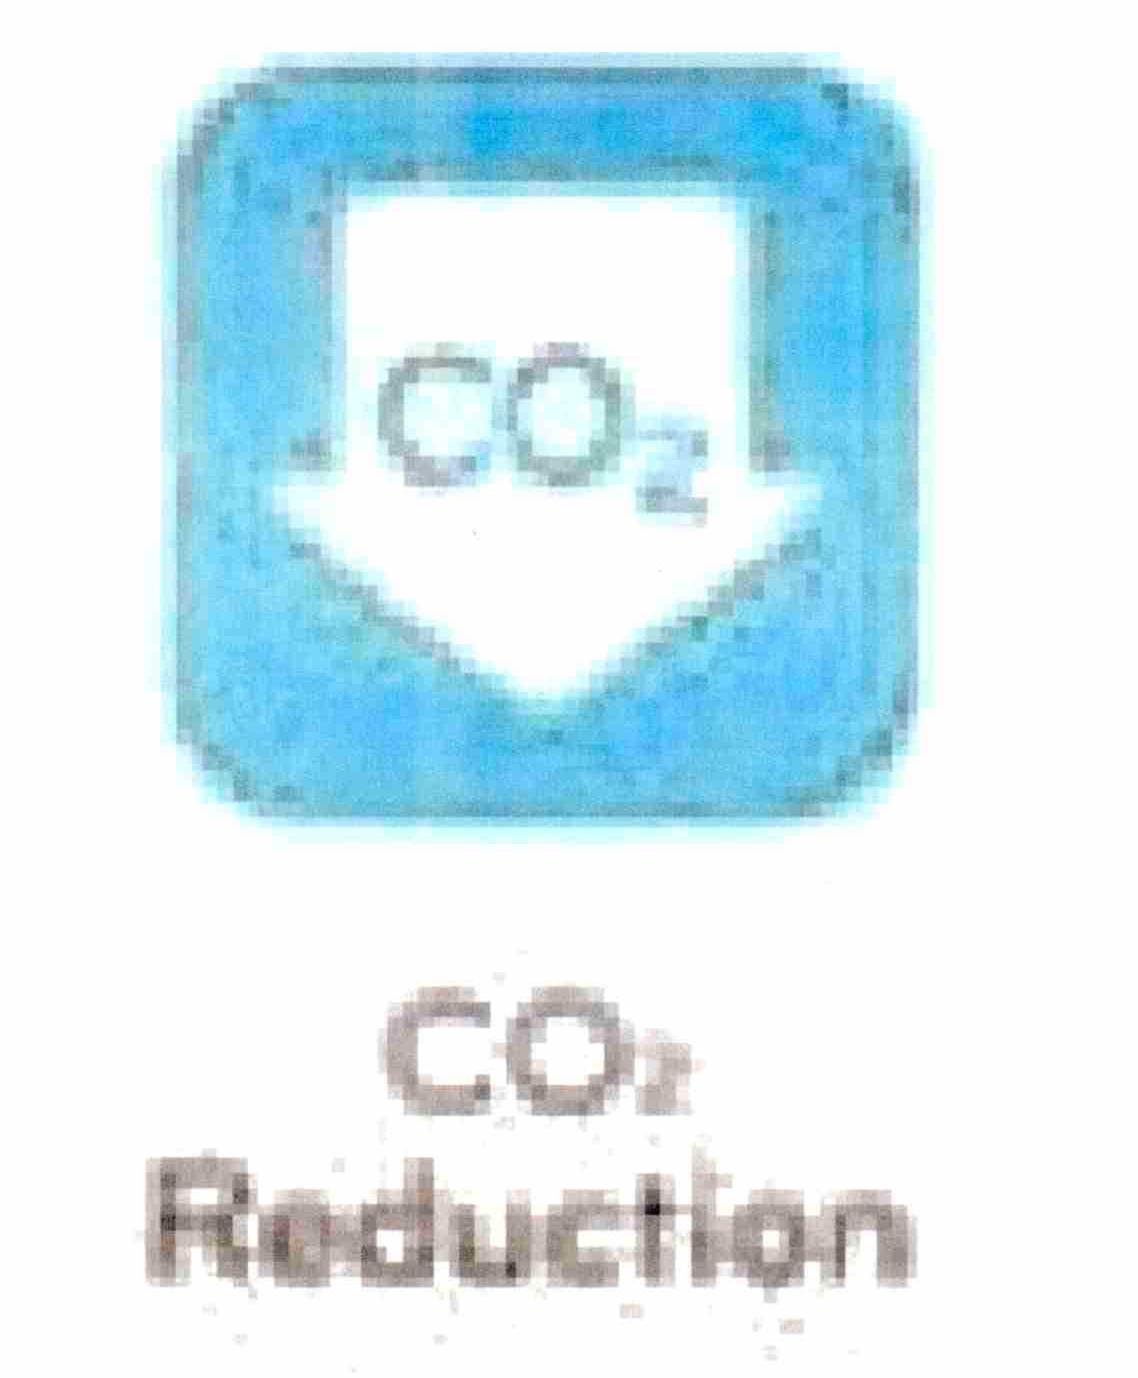  CO2 CO2 REDUCTION